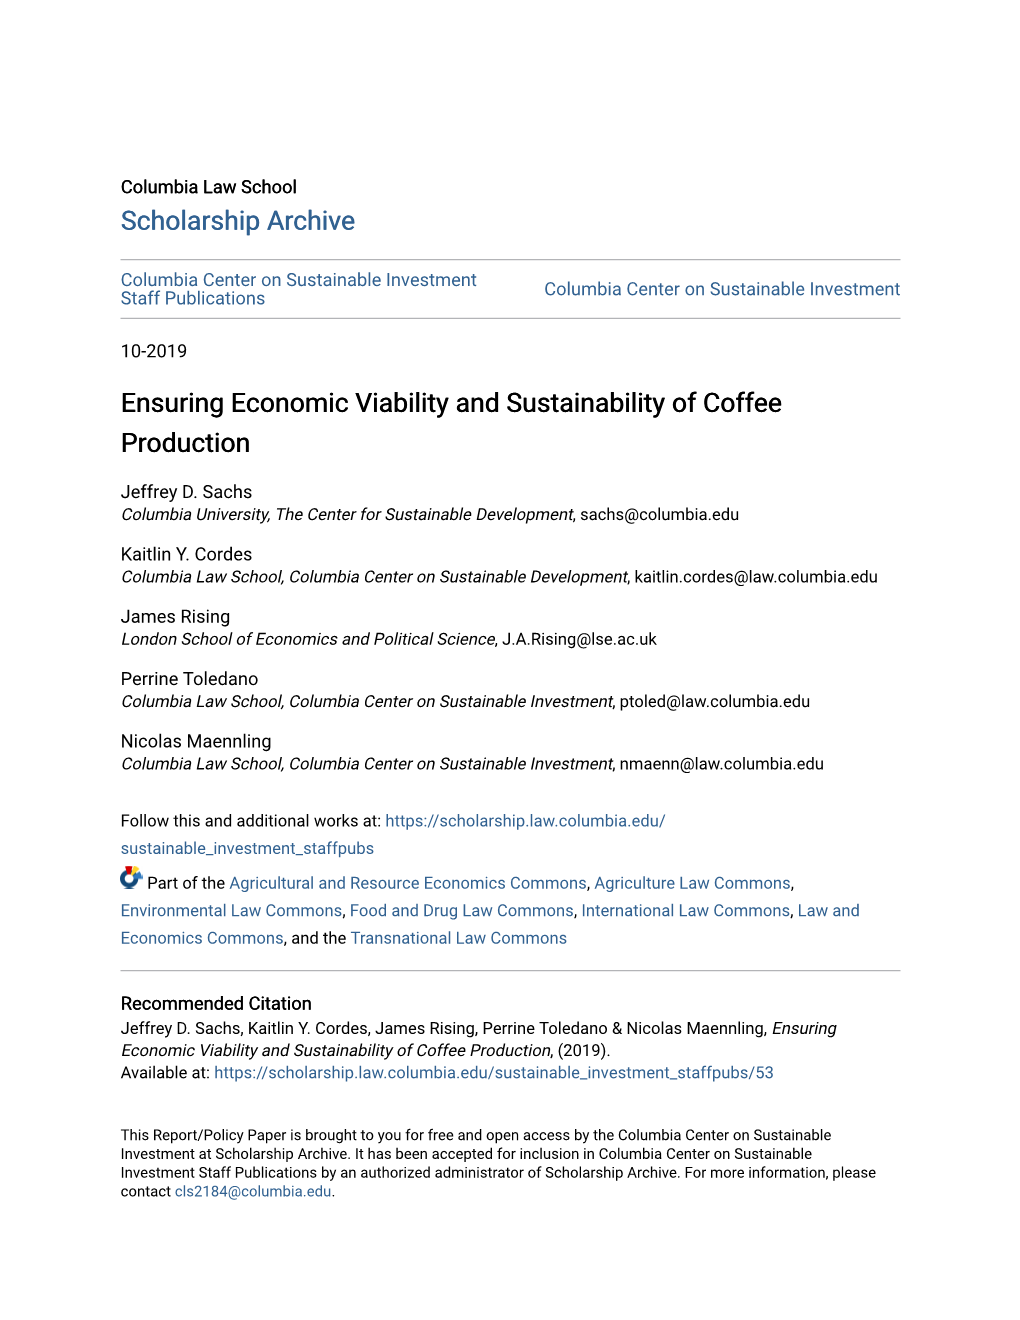 Ensuring Economic Viability and Sustainability of Coffee Production